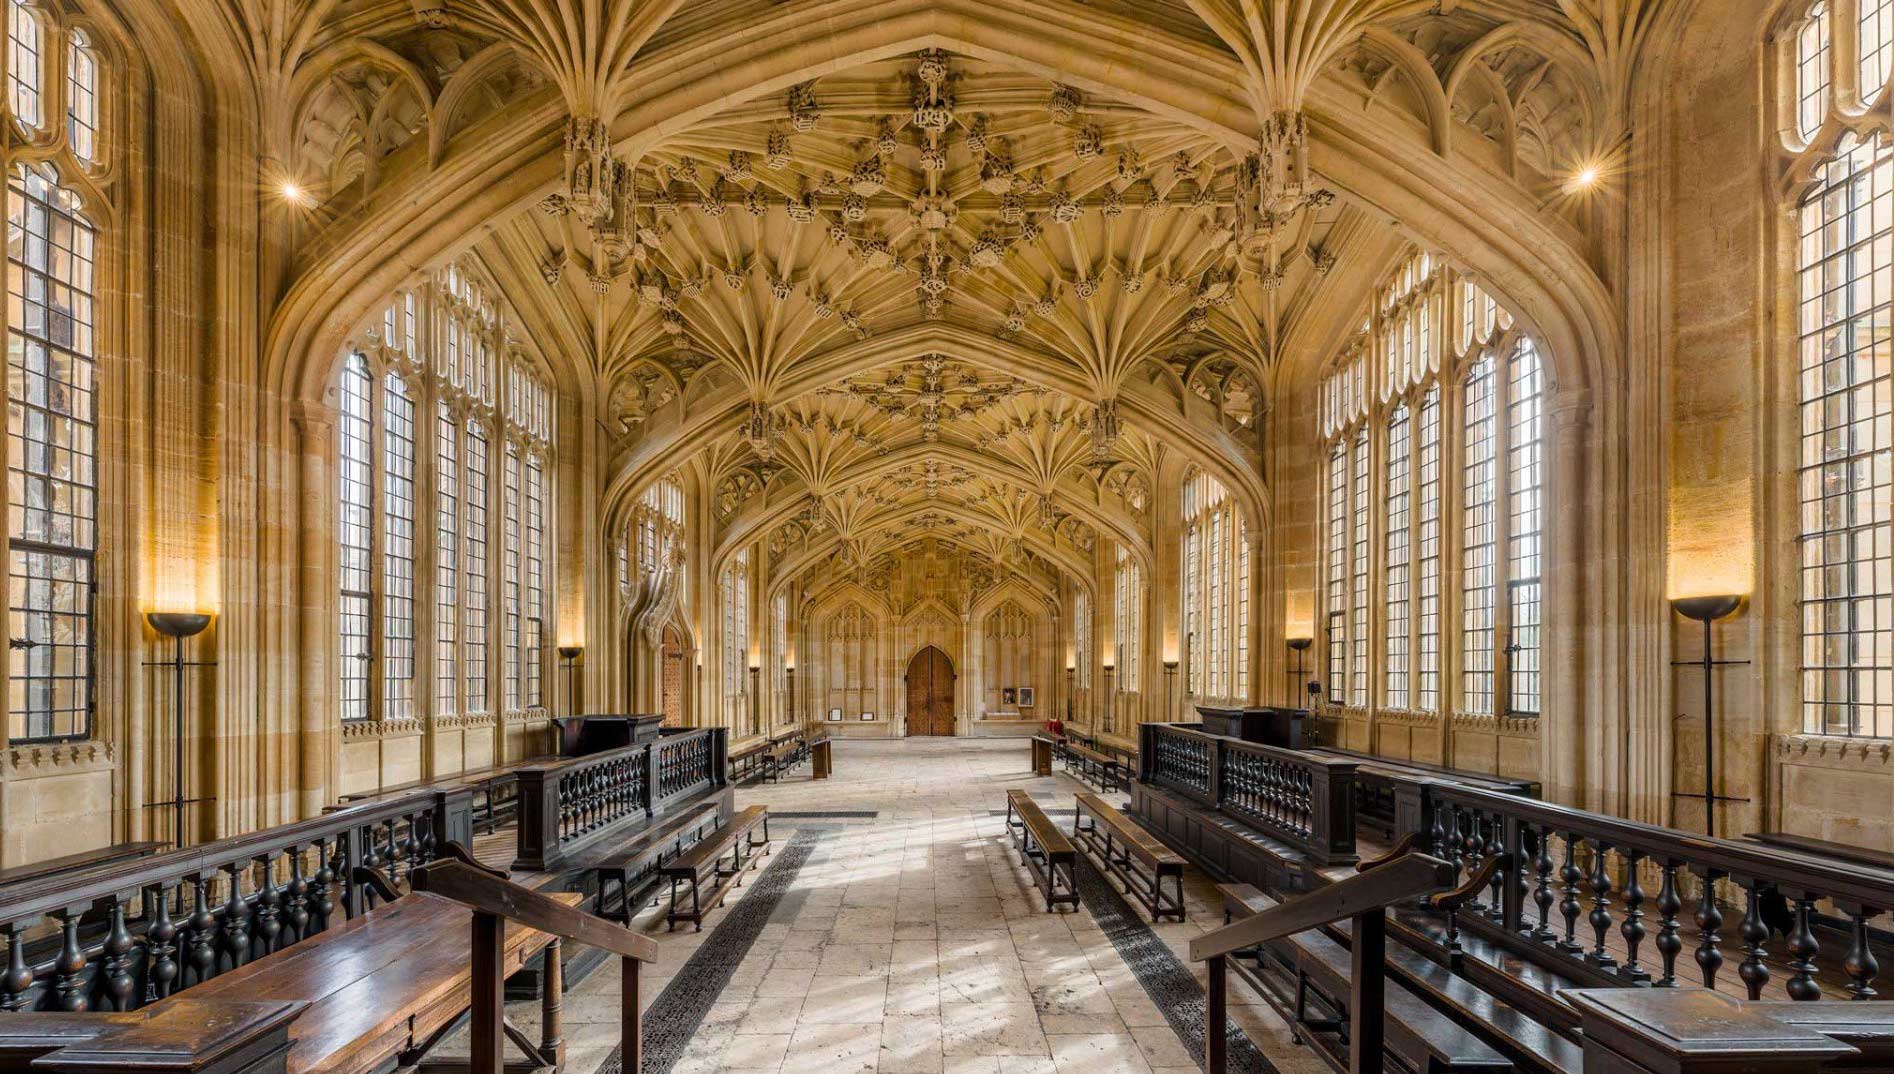 PRIVATE Harry Potter Insights Oxford with Entry to Divinity School